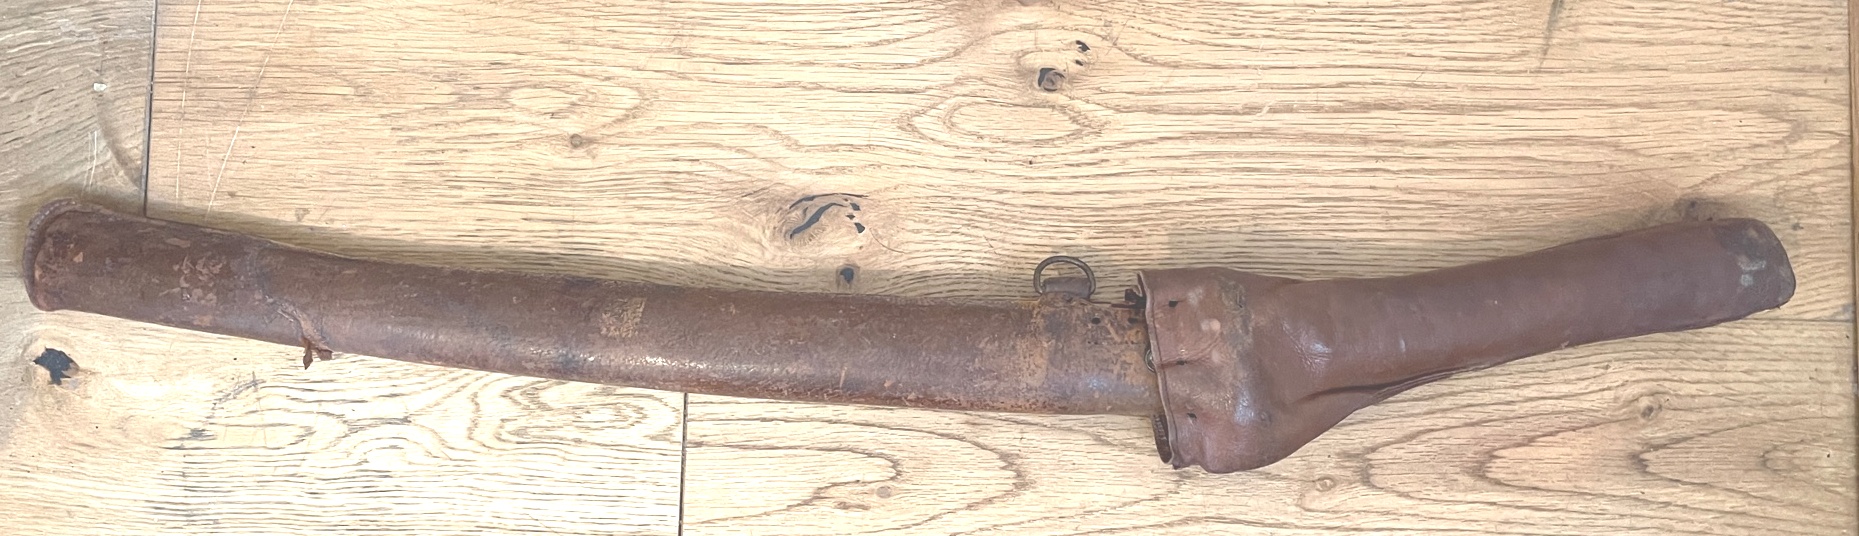 Antique Japanese Wakizashi Sword and Jungle Cover with WW2 Fittings - 30"" overall with 19 1/4"" bla - Image 2 of 14